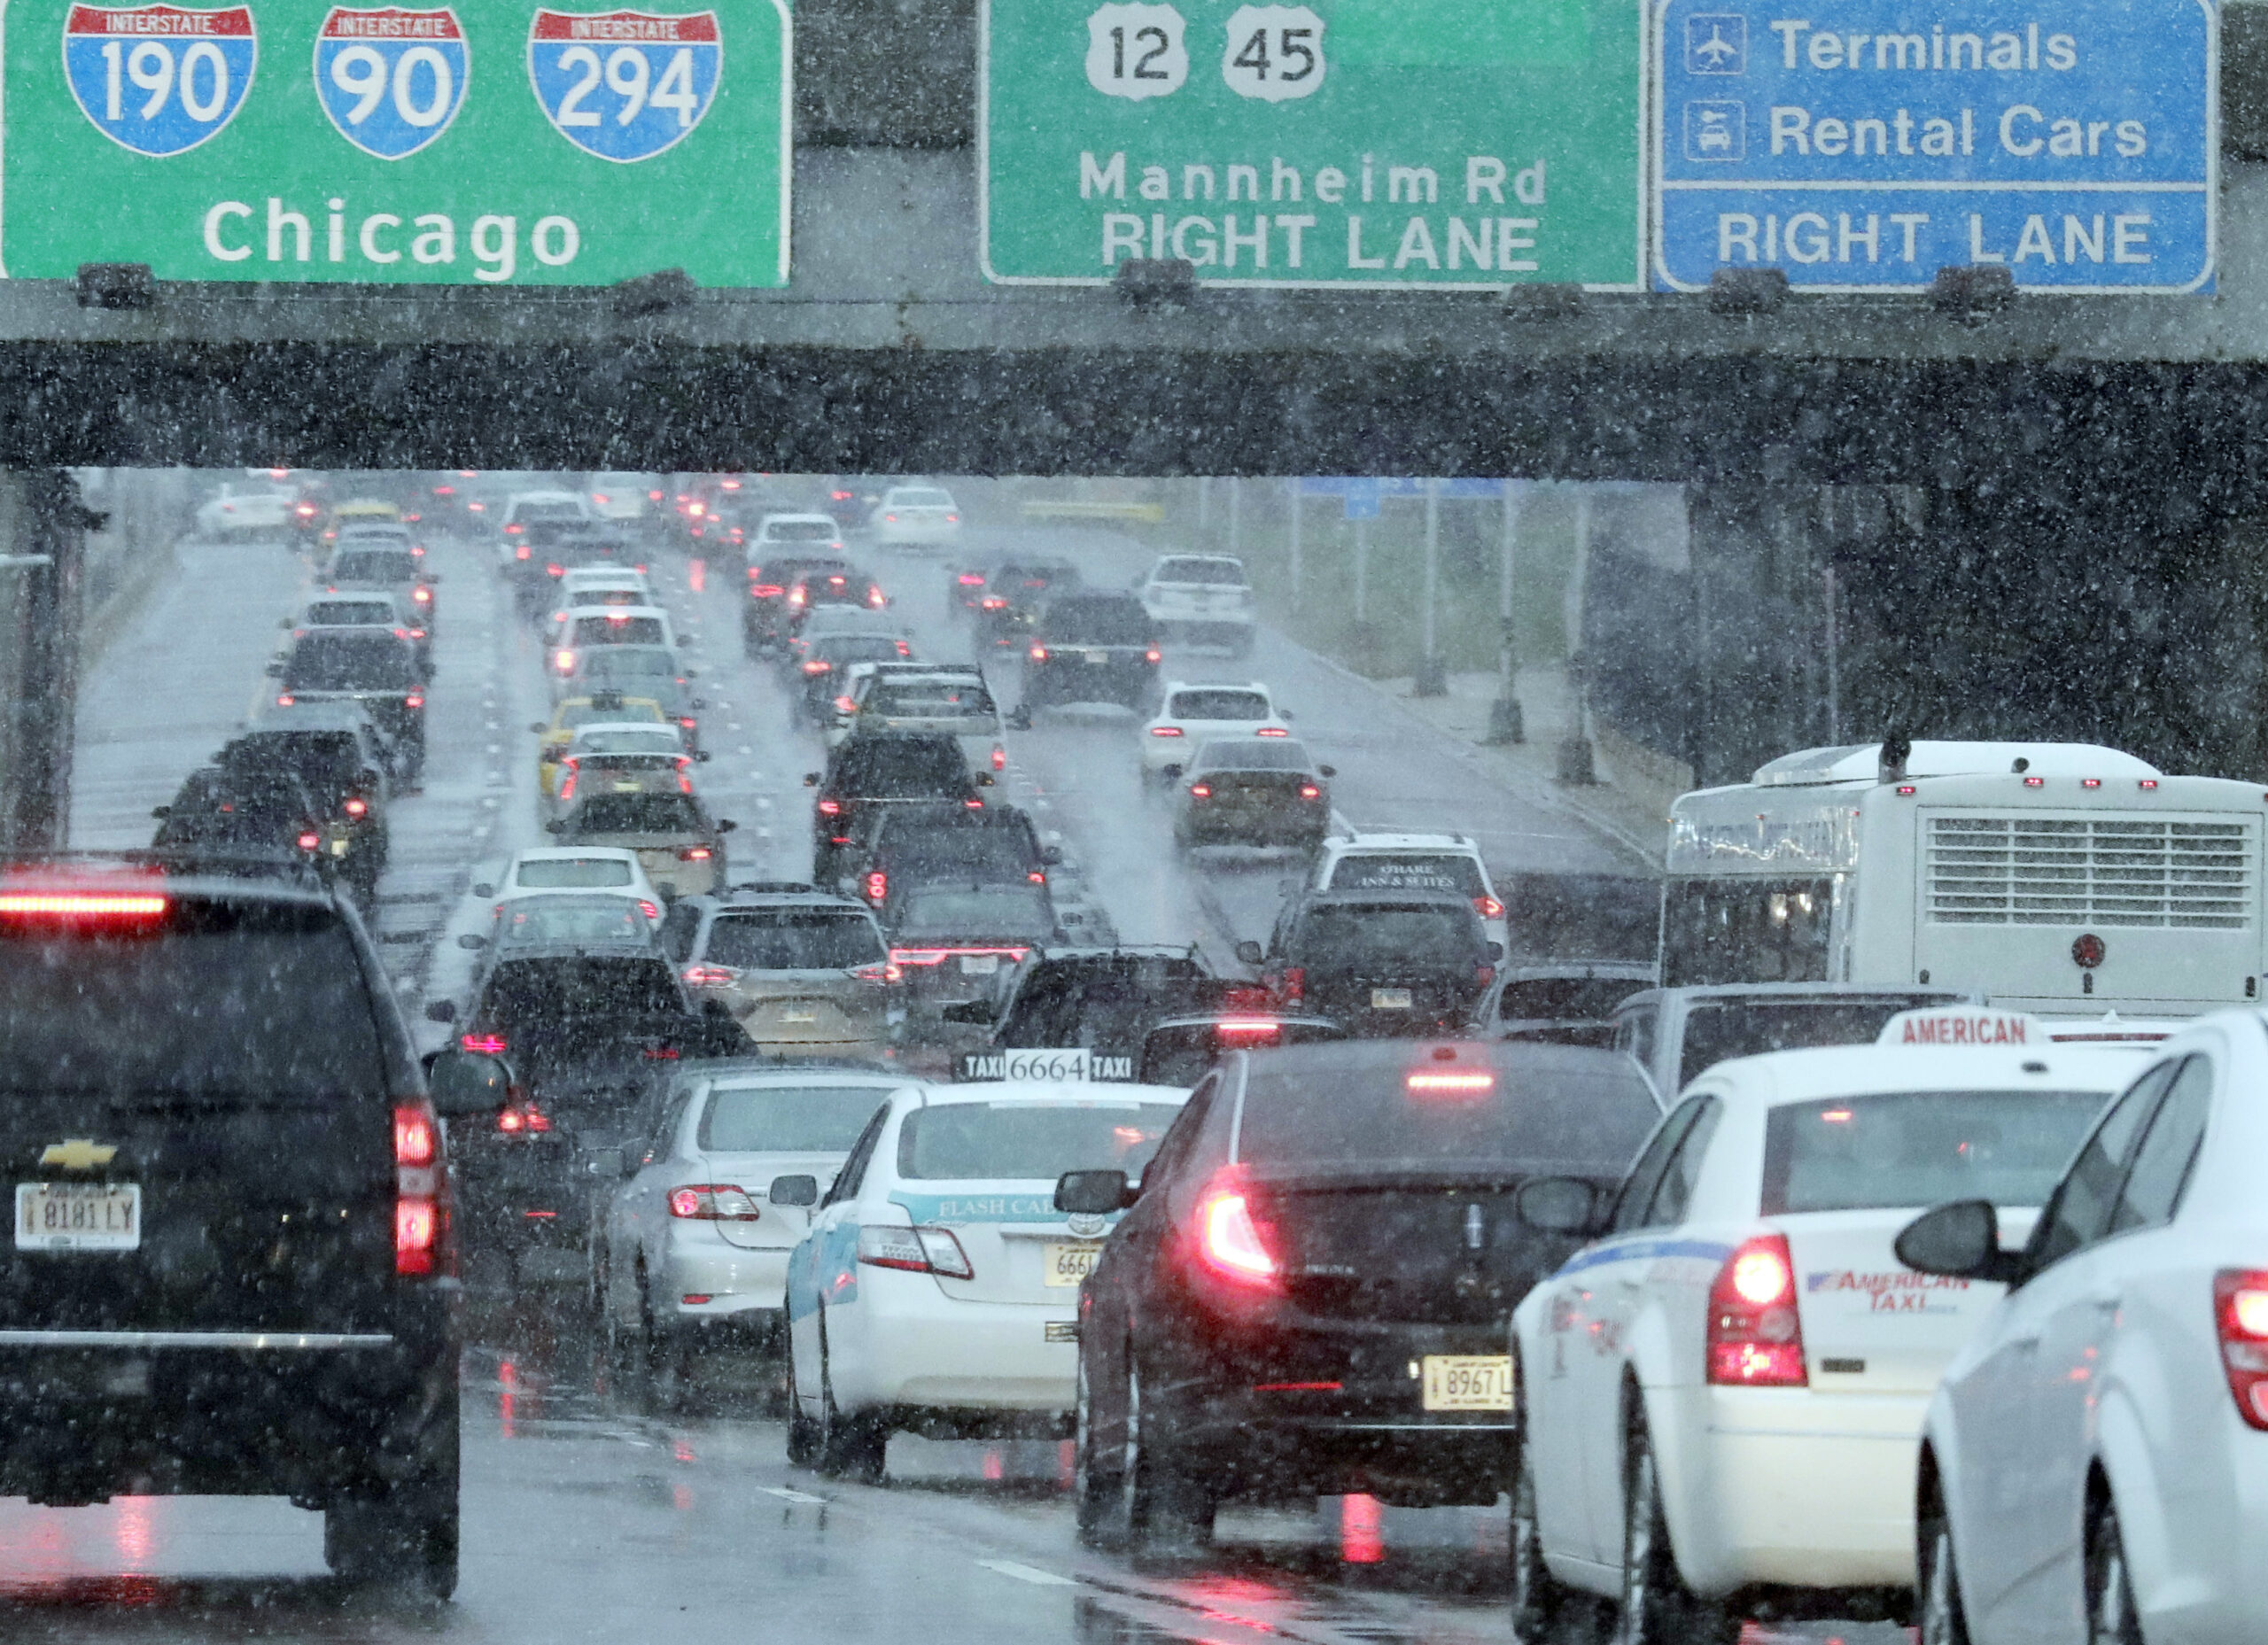 Heavy traffic is seen on Interstate 190 near due to a winter snow storm